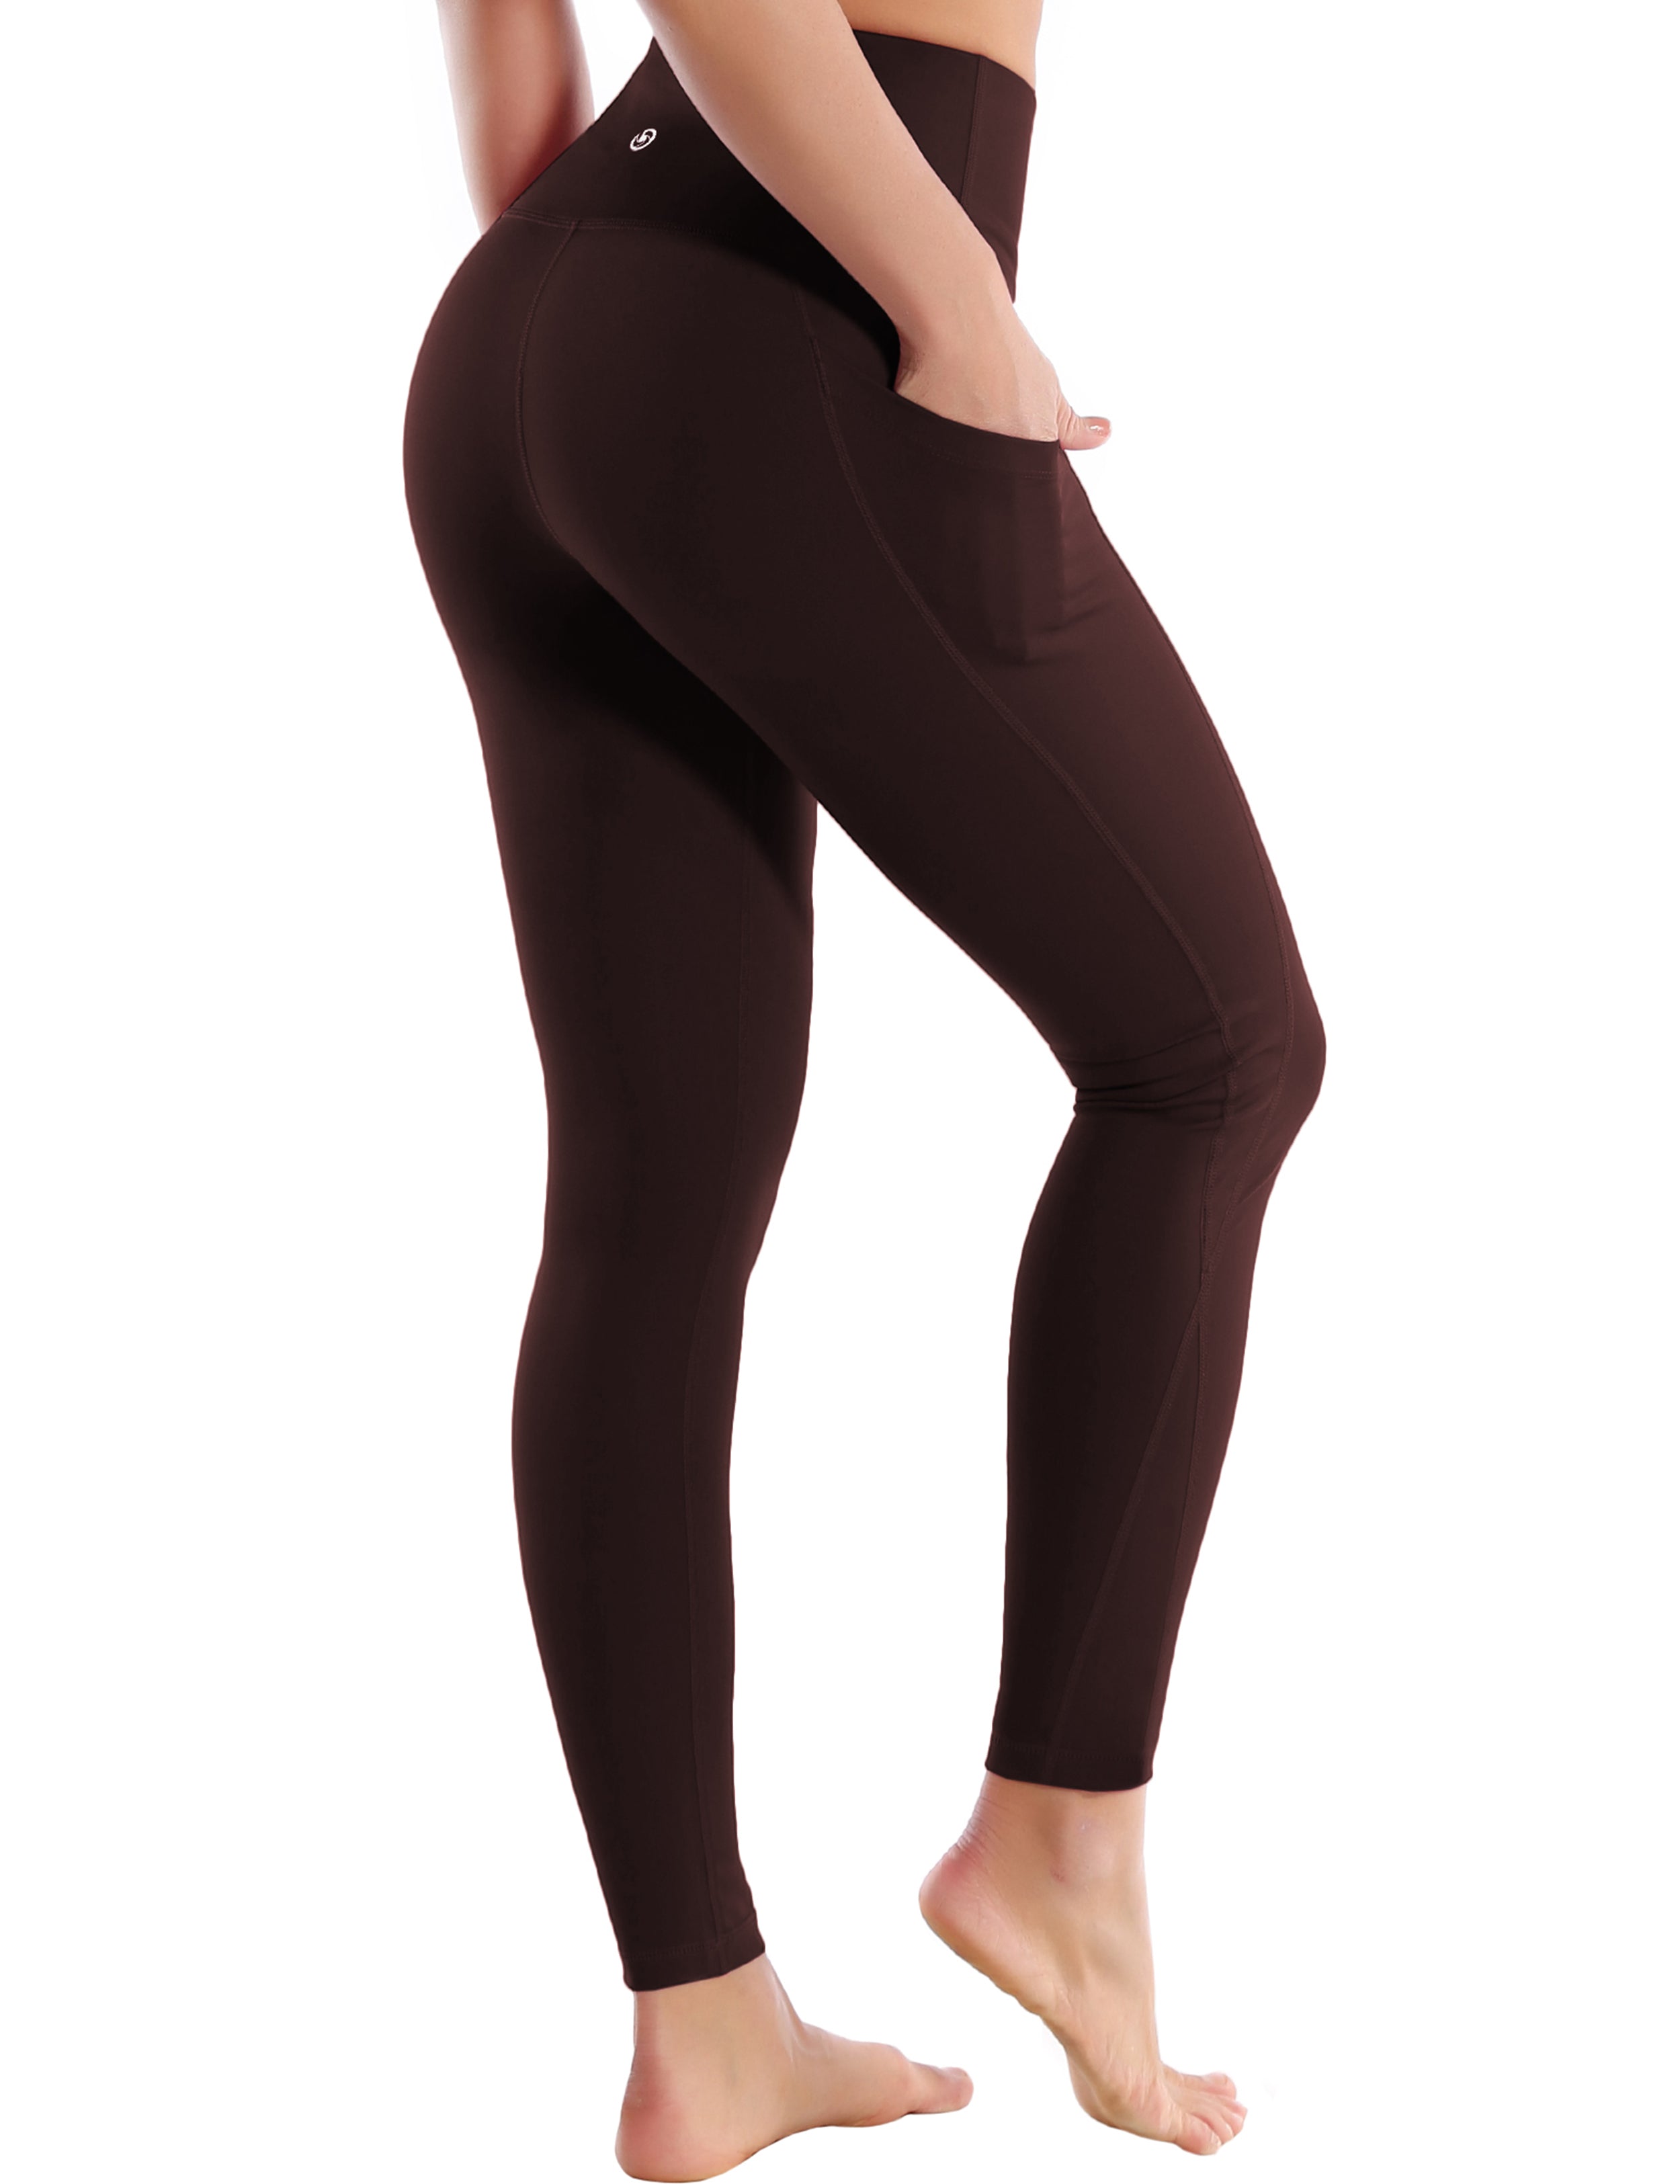 High Waist Side Pockets Gym Pants mahoganymaroon 75% Nylon, 25% Spandex Fabric doesn't attract lint easily 4-way stretch No see-through Moisture-wicking Tummy control Inner pocket